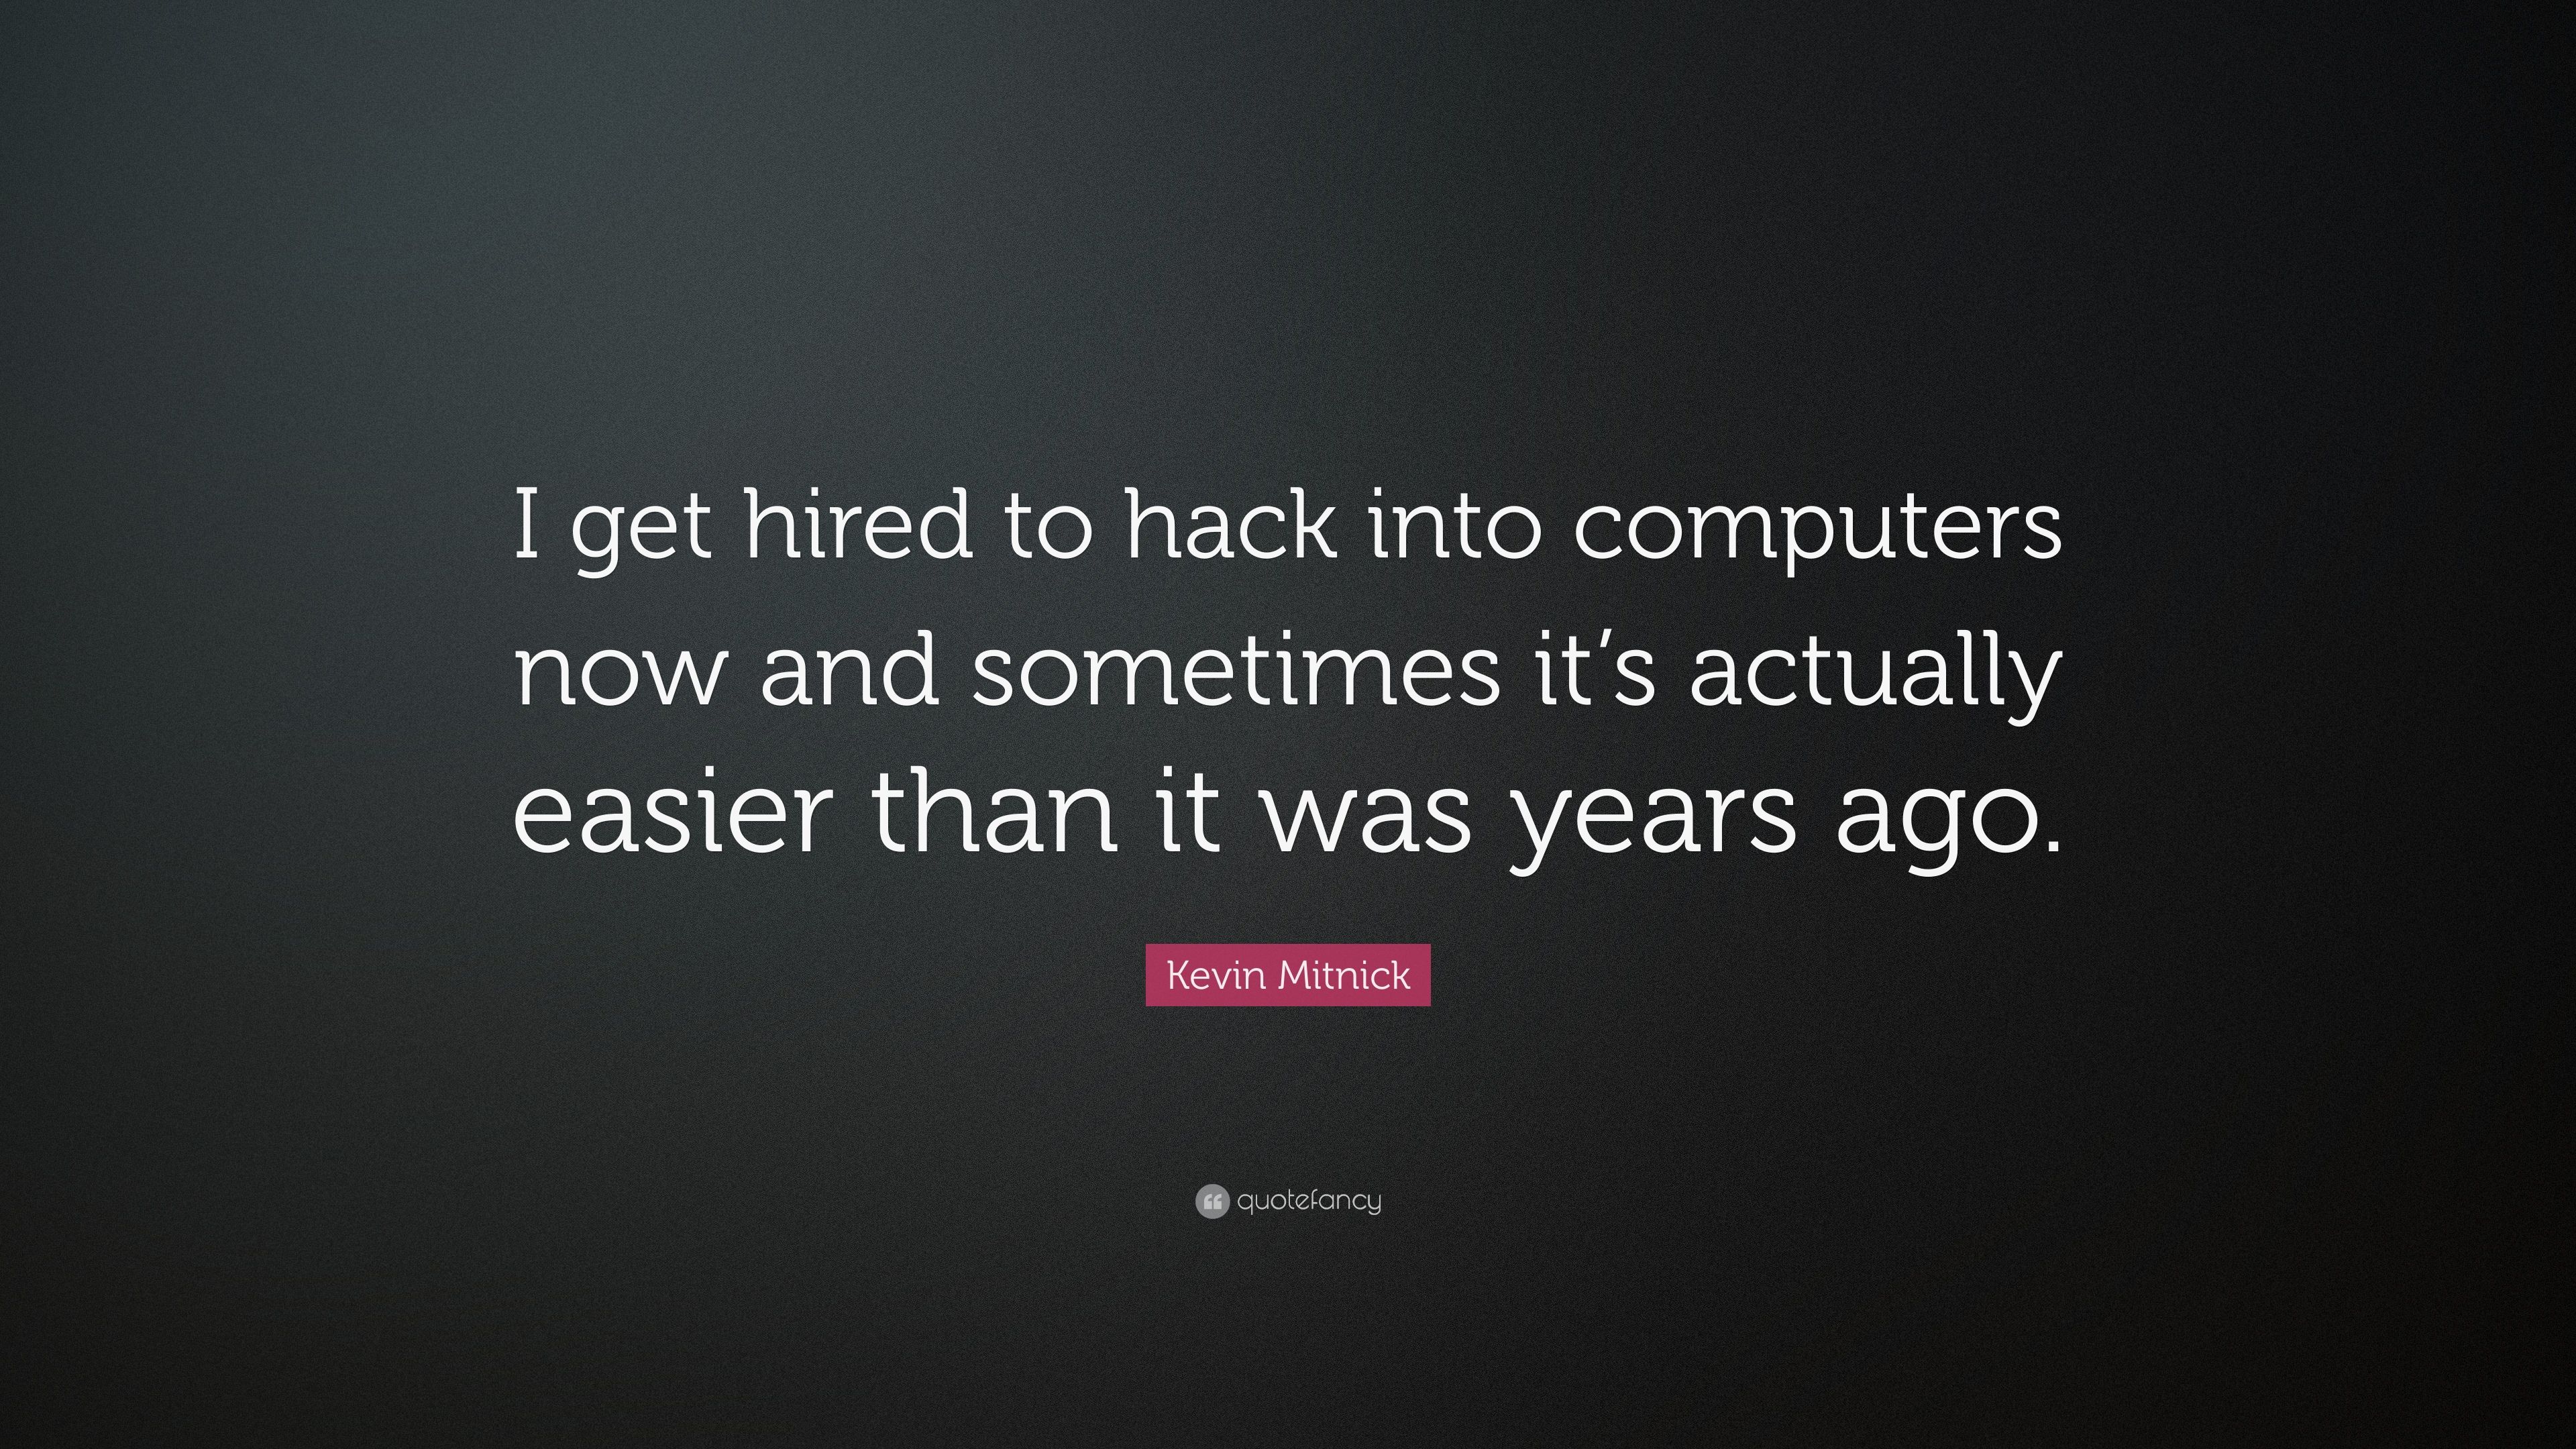 Kevin Mitnick Quotes (2022 Update)